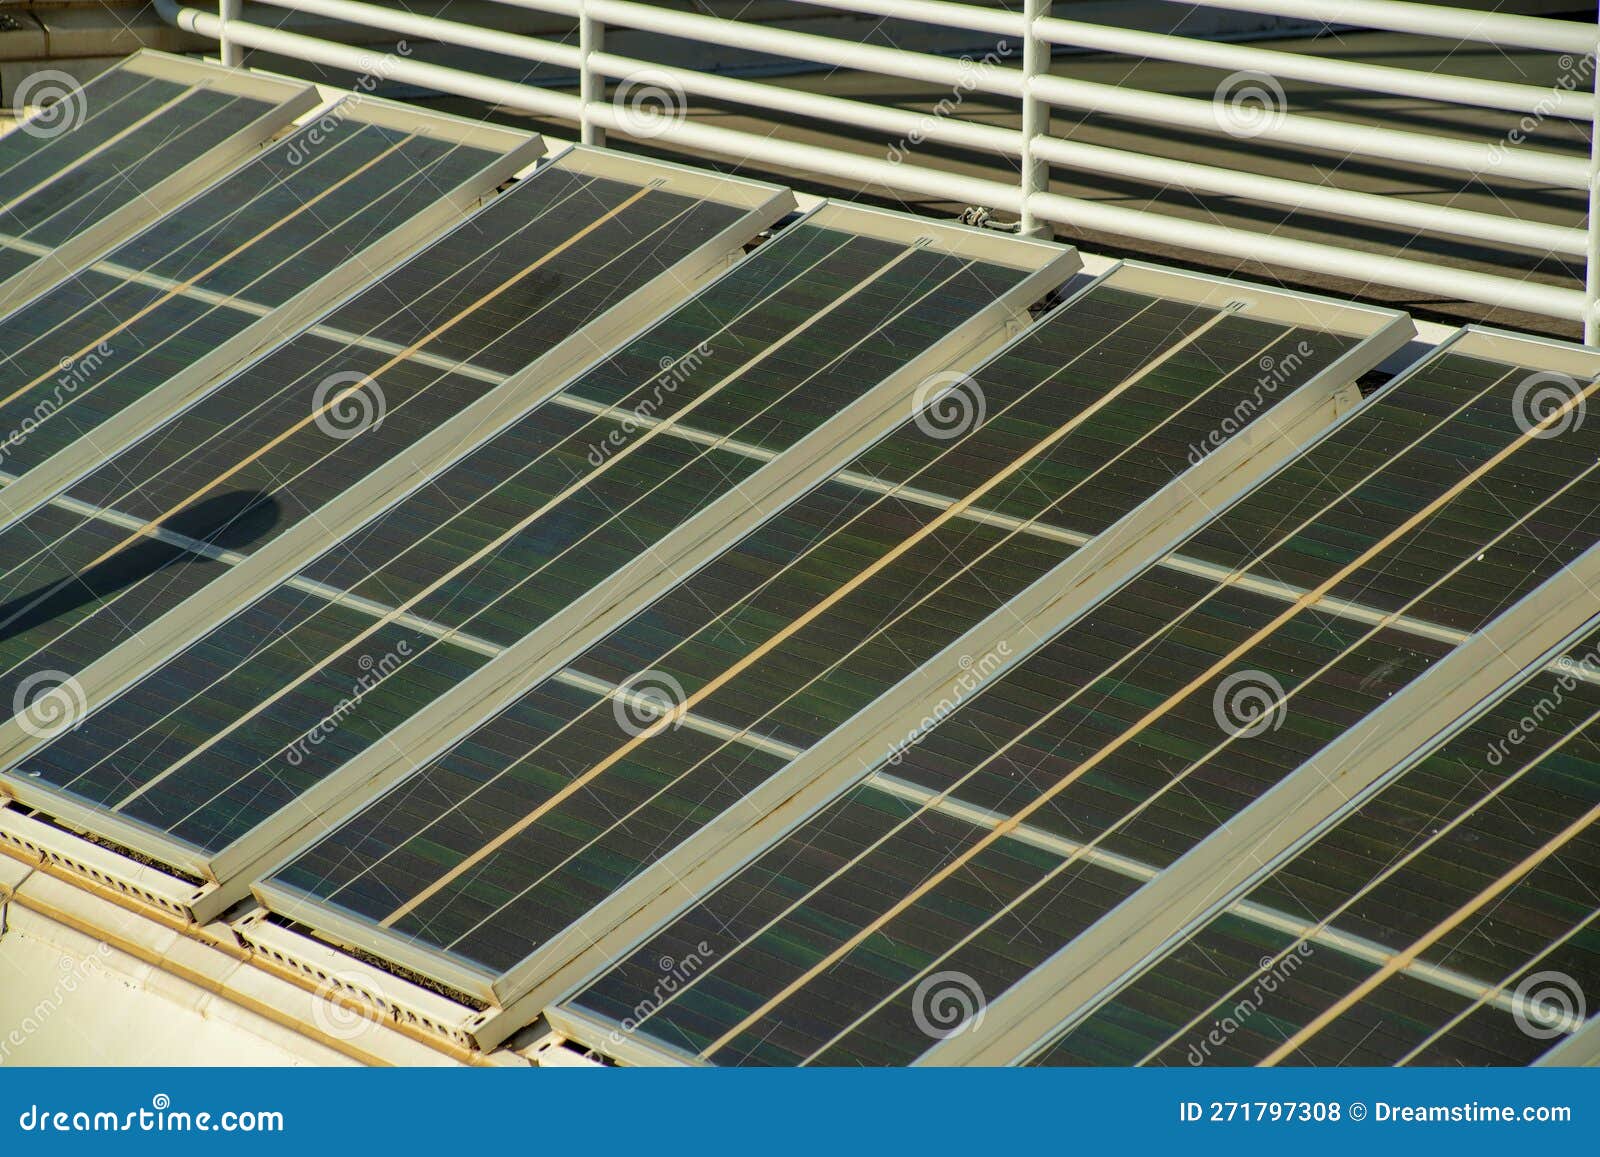 row of industrial photovoltaic or solar pannels on side of building with metal gaurd rail at thirty degree angle for sun